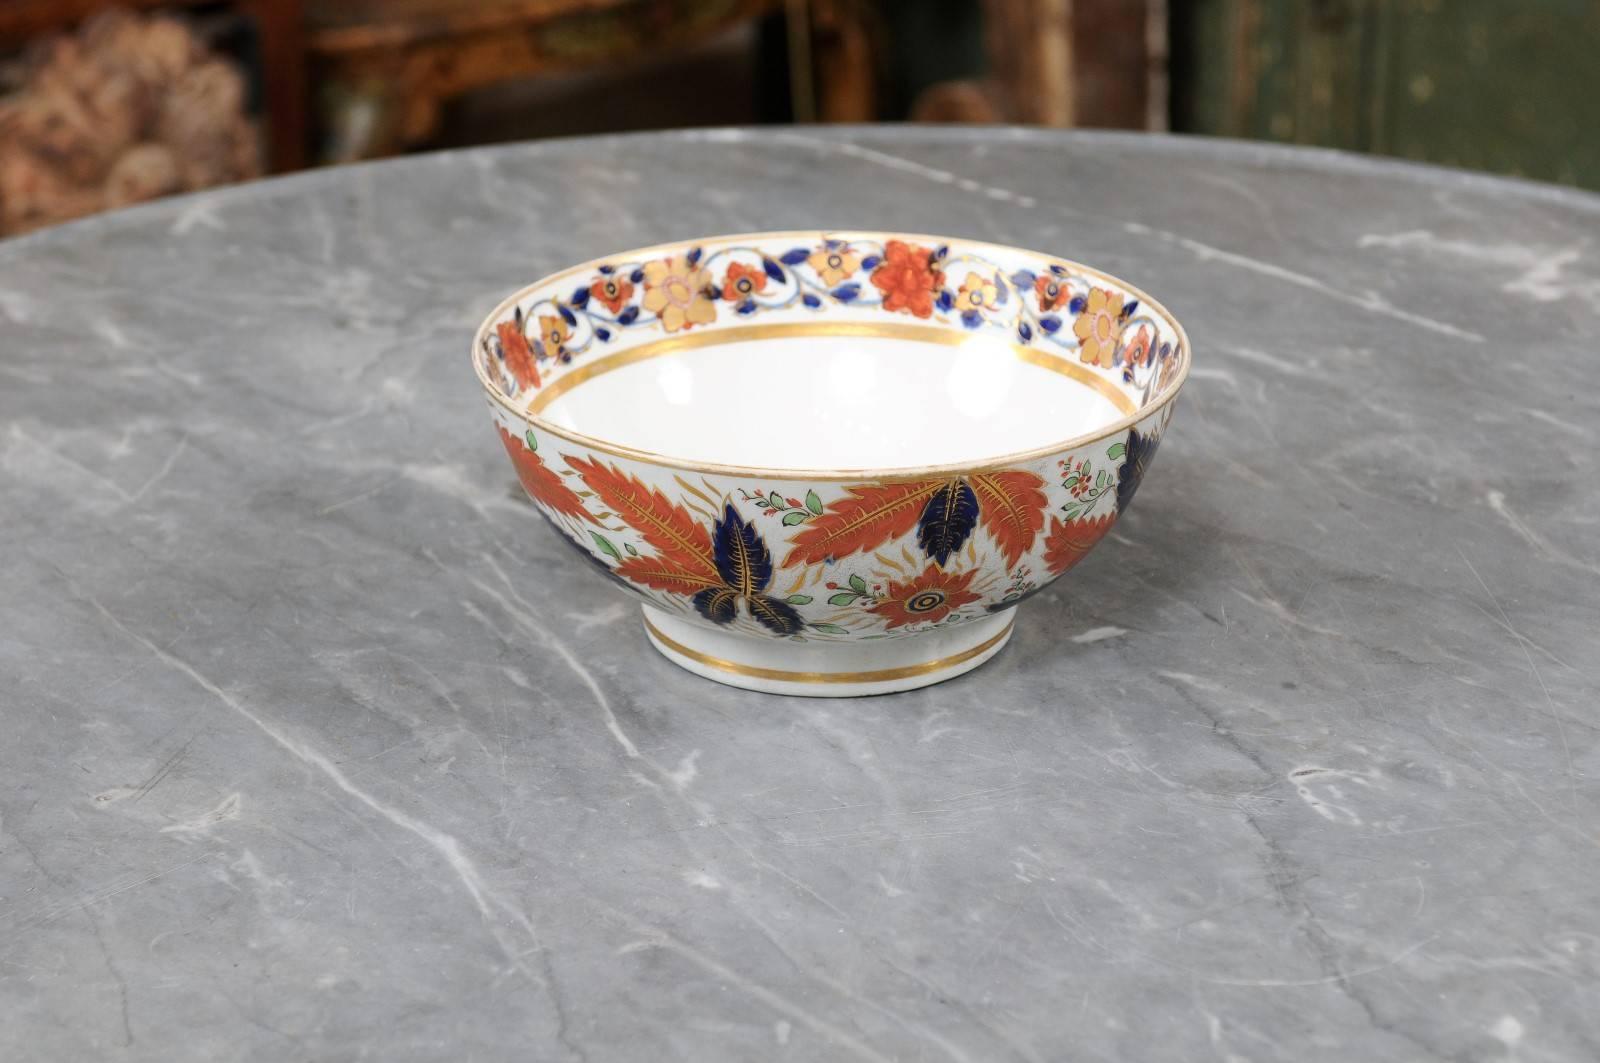 19th Century Spode “Tabacco Leaf” Punch Bowl after Chinese Export Design, England, ca. 1820 For Sale